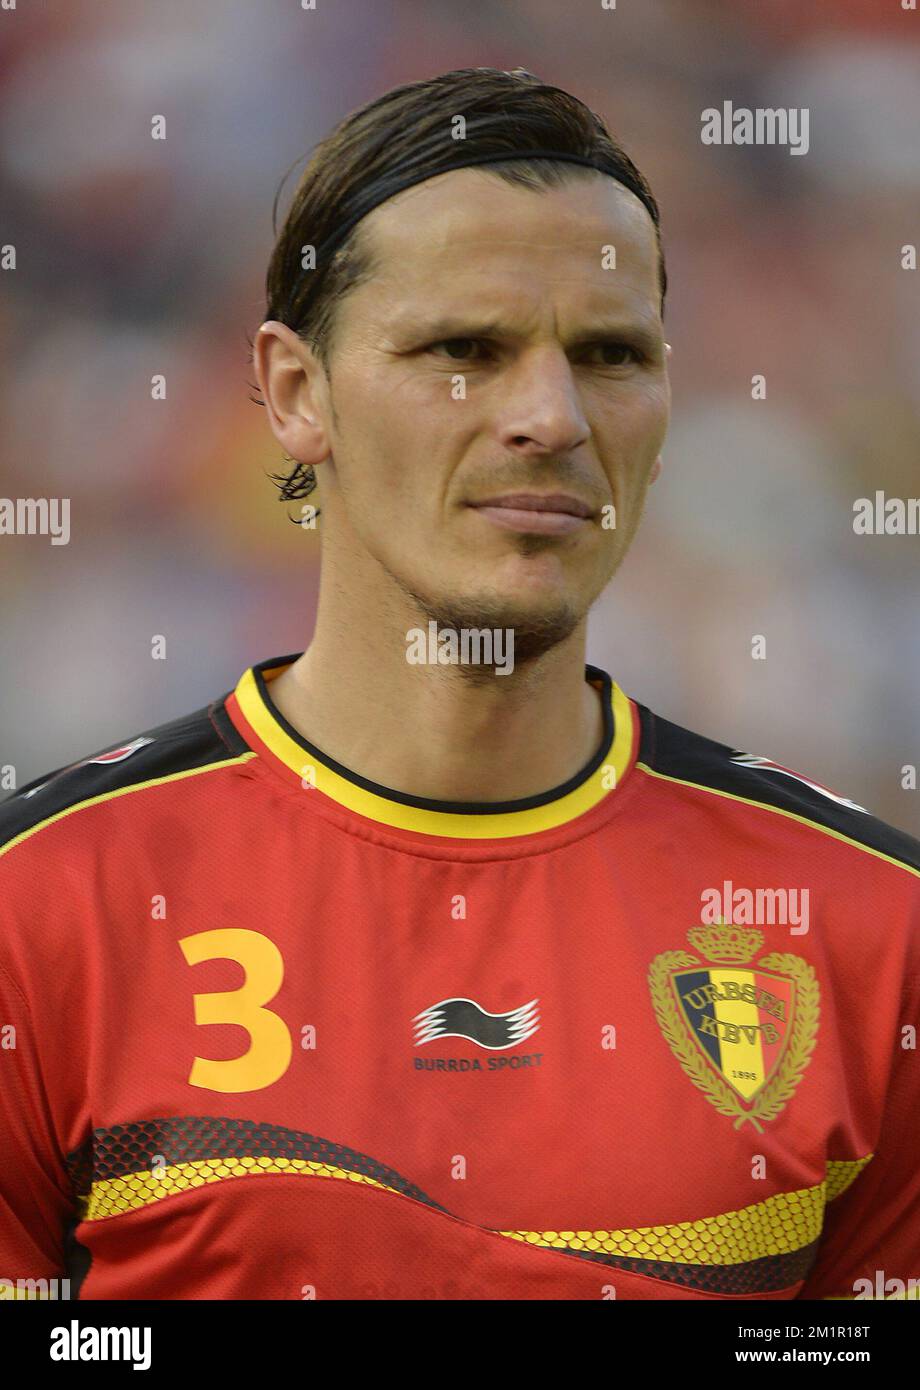 Belgium's Daniel Van Buyten pictured at the start of a match of the Belgian national soccer team 'Red Devils' against the Serbian national soccer team, Friday 07 June 2013 in Brussels. The game is part of the qualifying matches for the 2014 FIFA World Cup.  Stock Photo